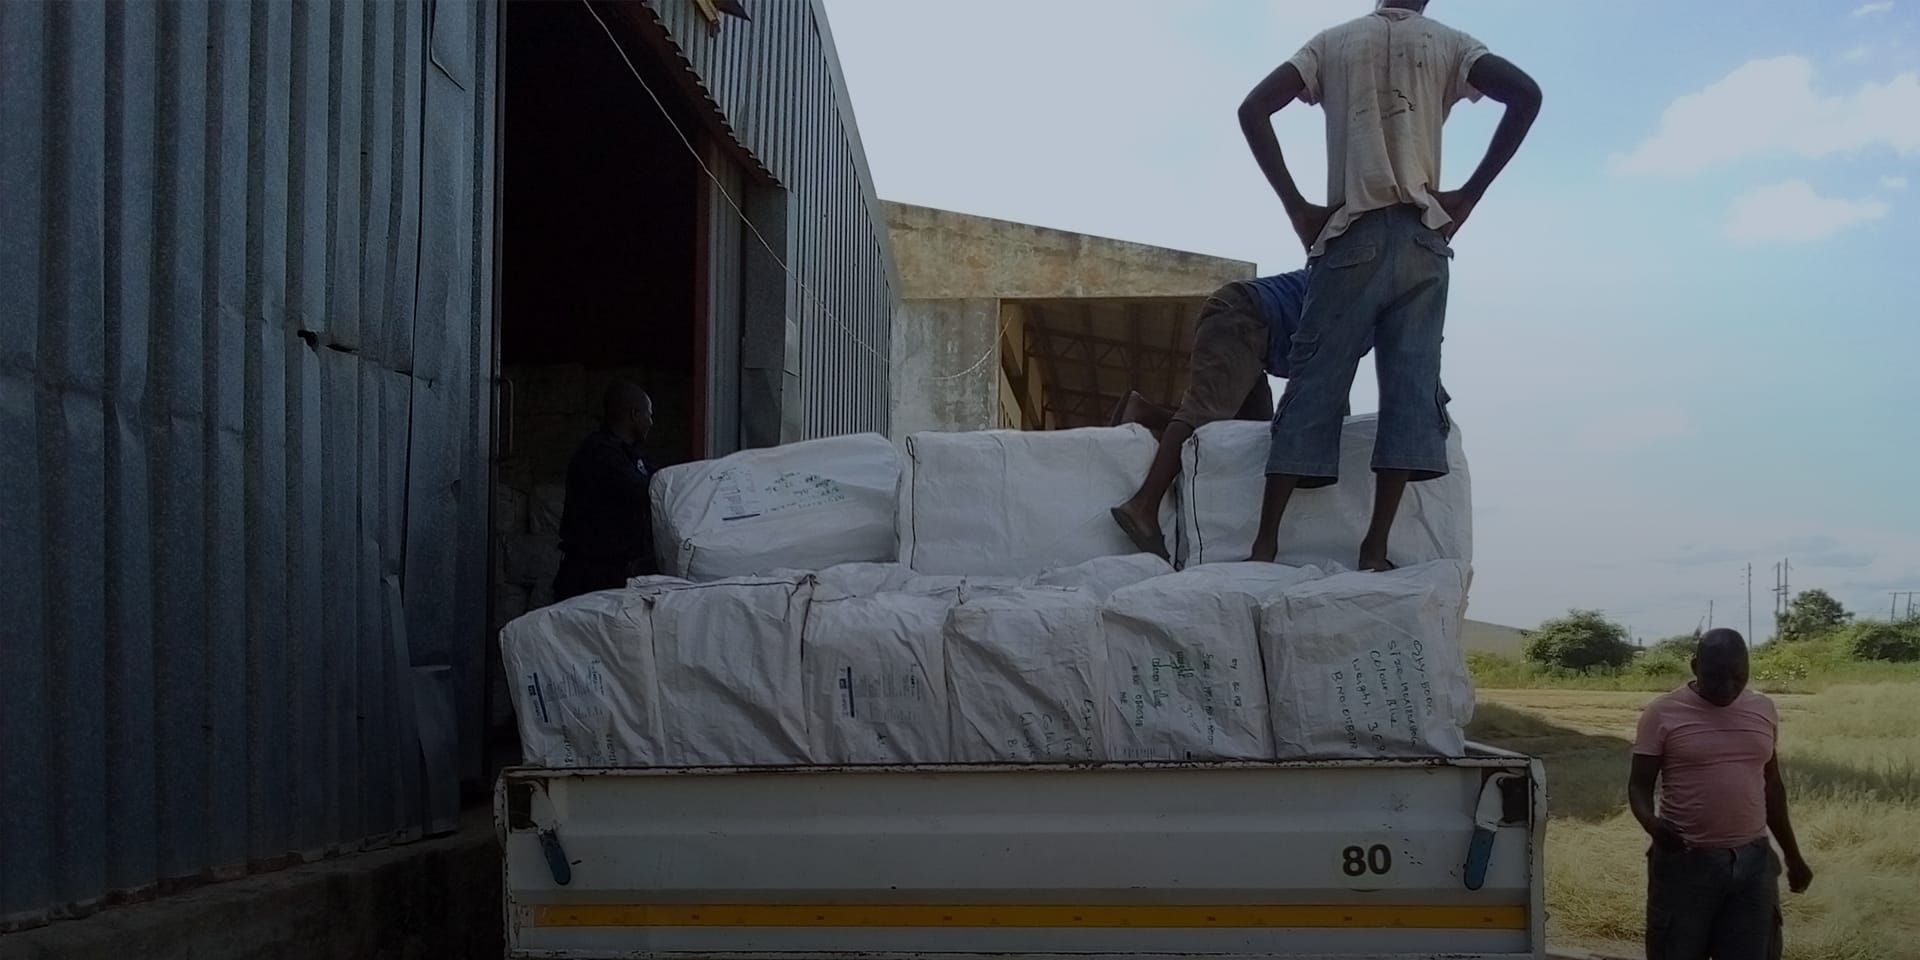 Image of workers unloading boxes on a truck into a warehouse.